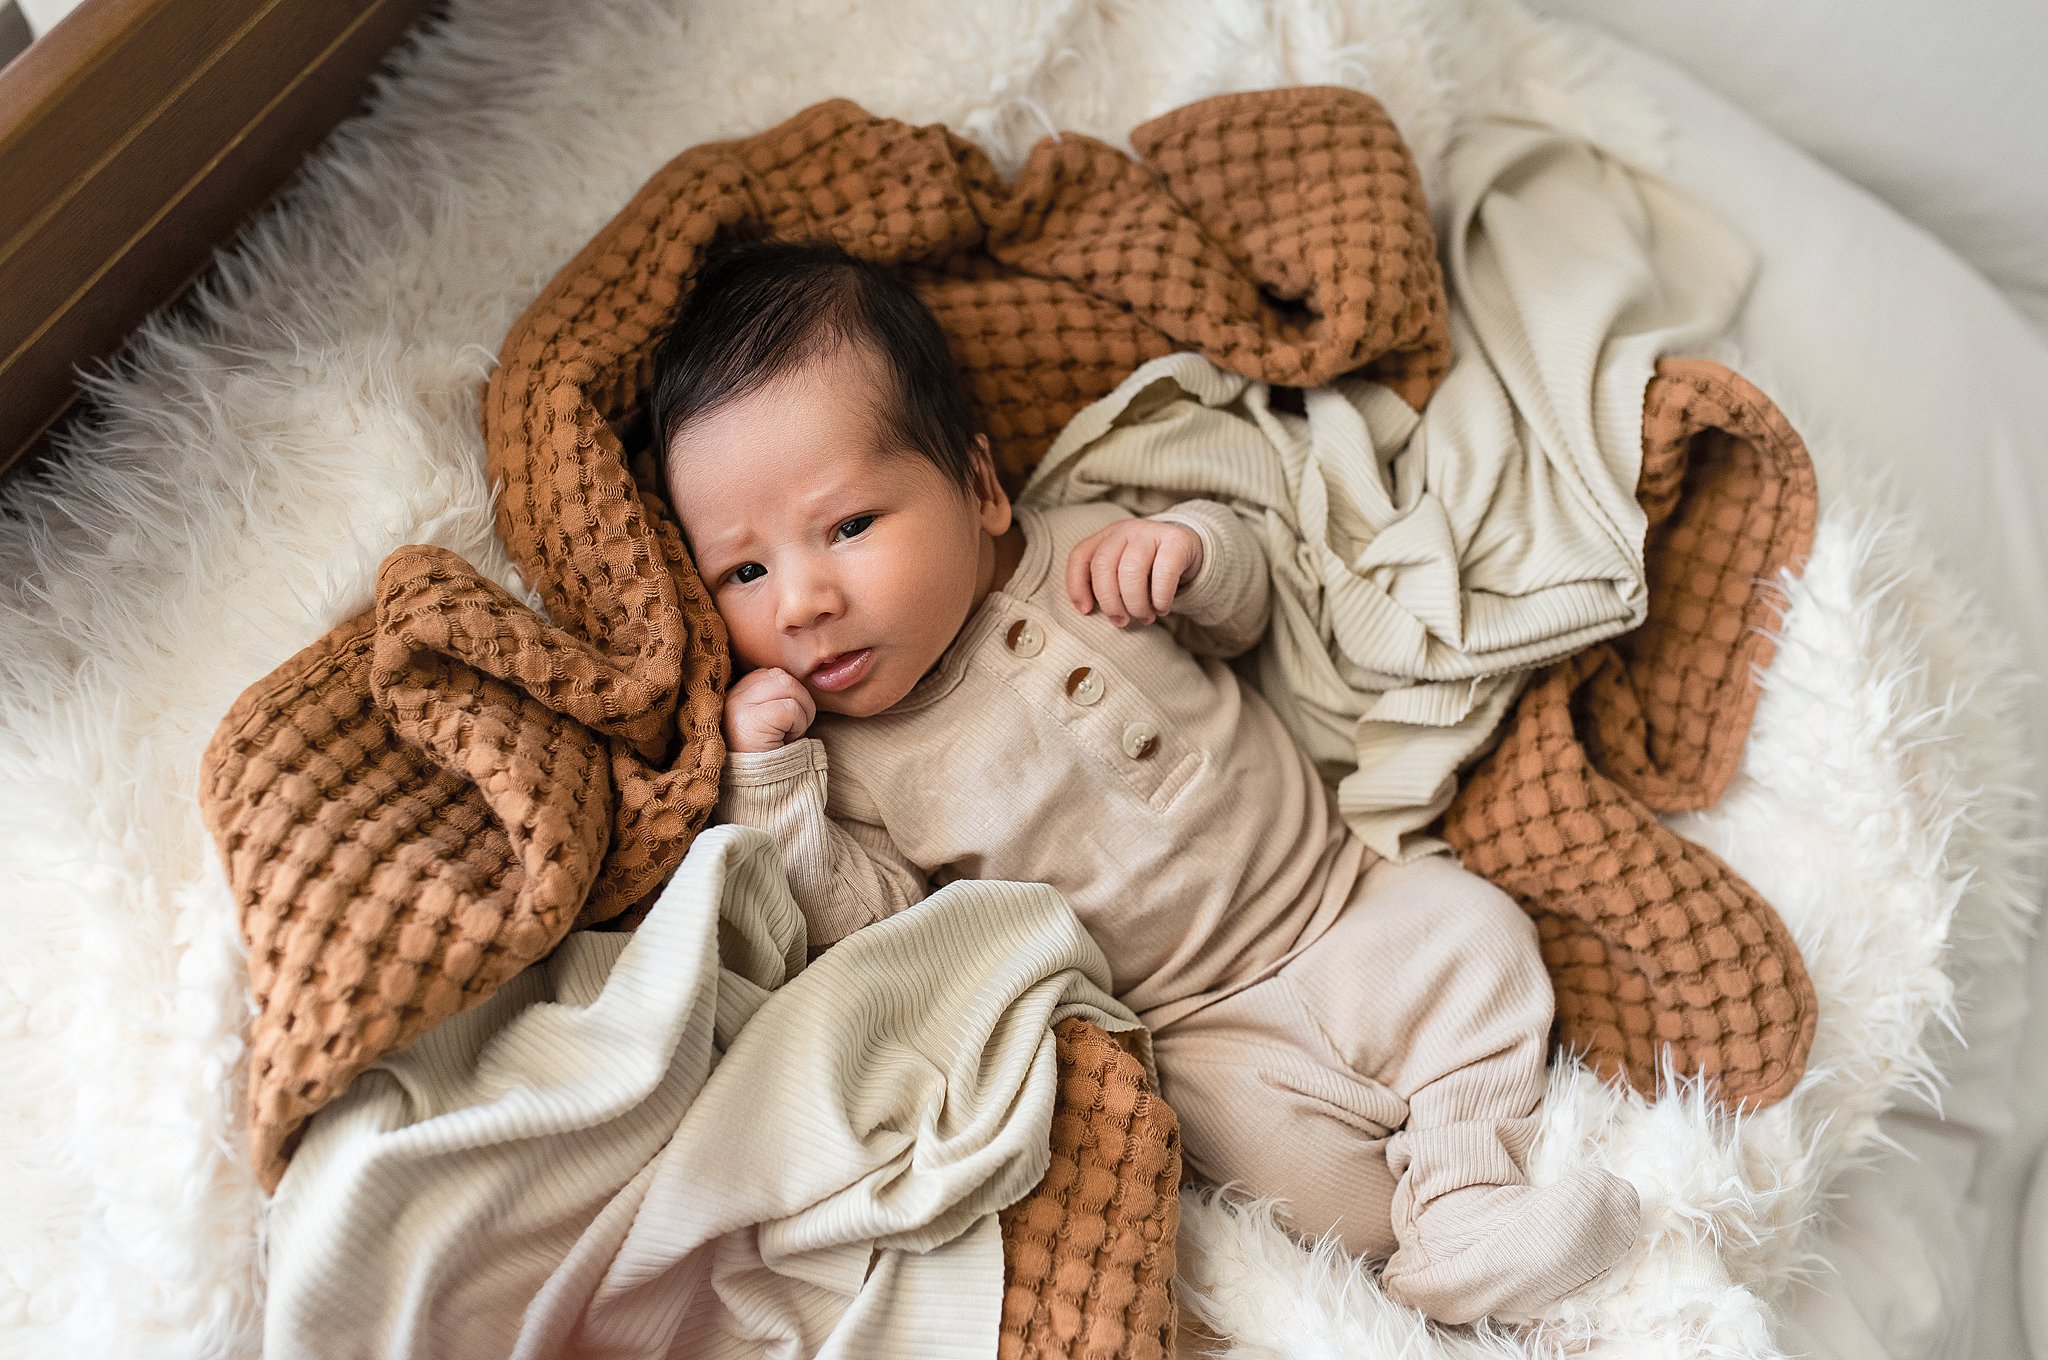 A newborn baby lays on a bed of blankets in a beige onesie with eyes open